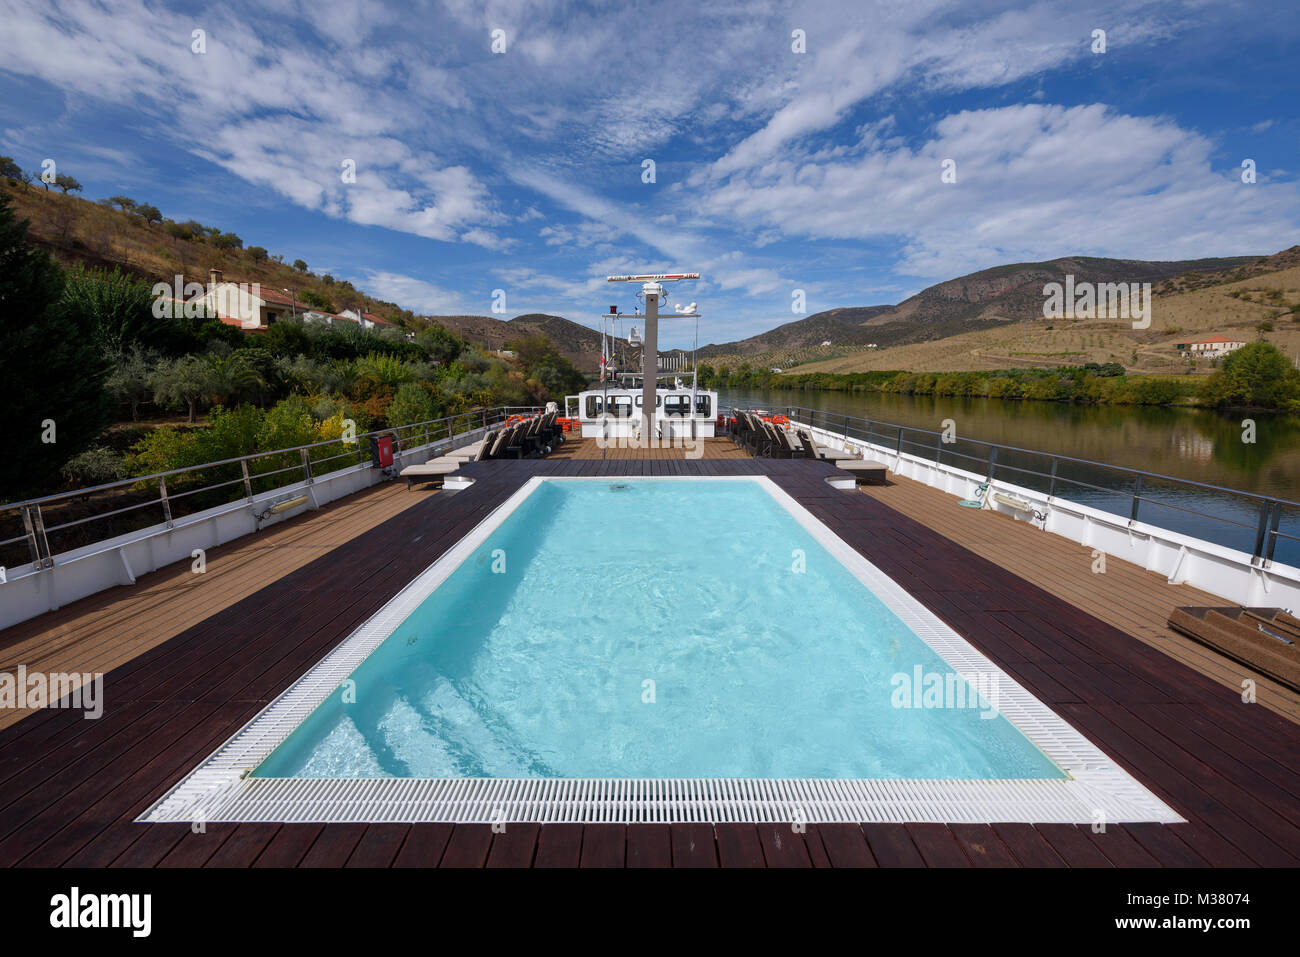 Douro Valley landscape viewed from the upper deck of the Douro Spirit cruise boat while moored at Barca d’Alva, Portugal, Europe Stock Photo